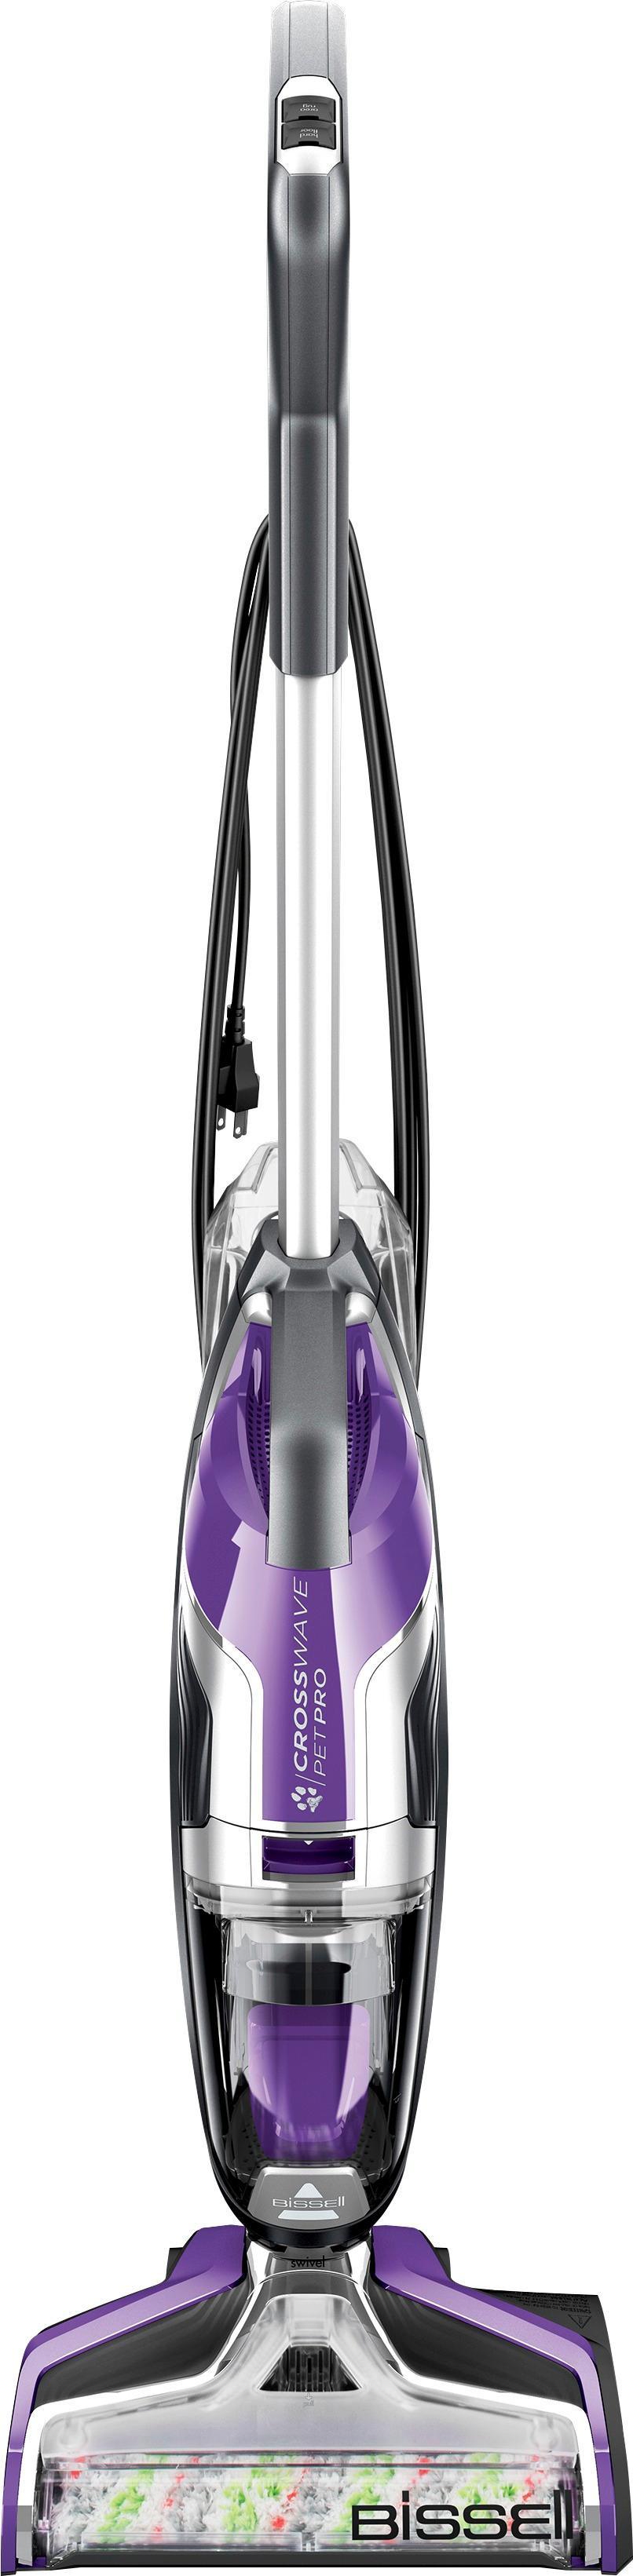 Rent to Own Bissell CrossWave Pet Pro All-in-One Multi-Surface Cleaner -  Grapevine Purple and Sparkle Silver at Aaron's today!